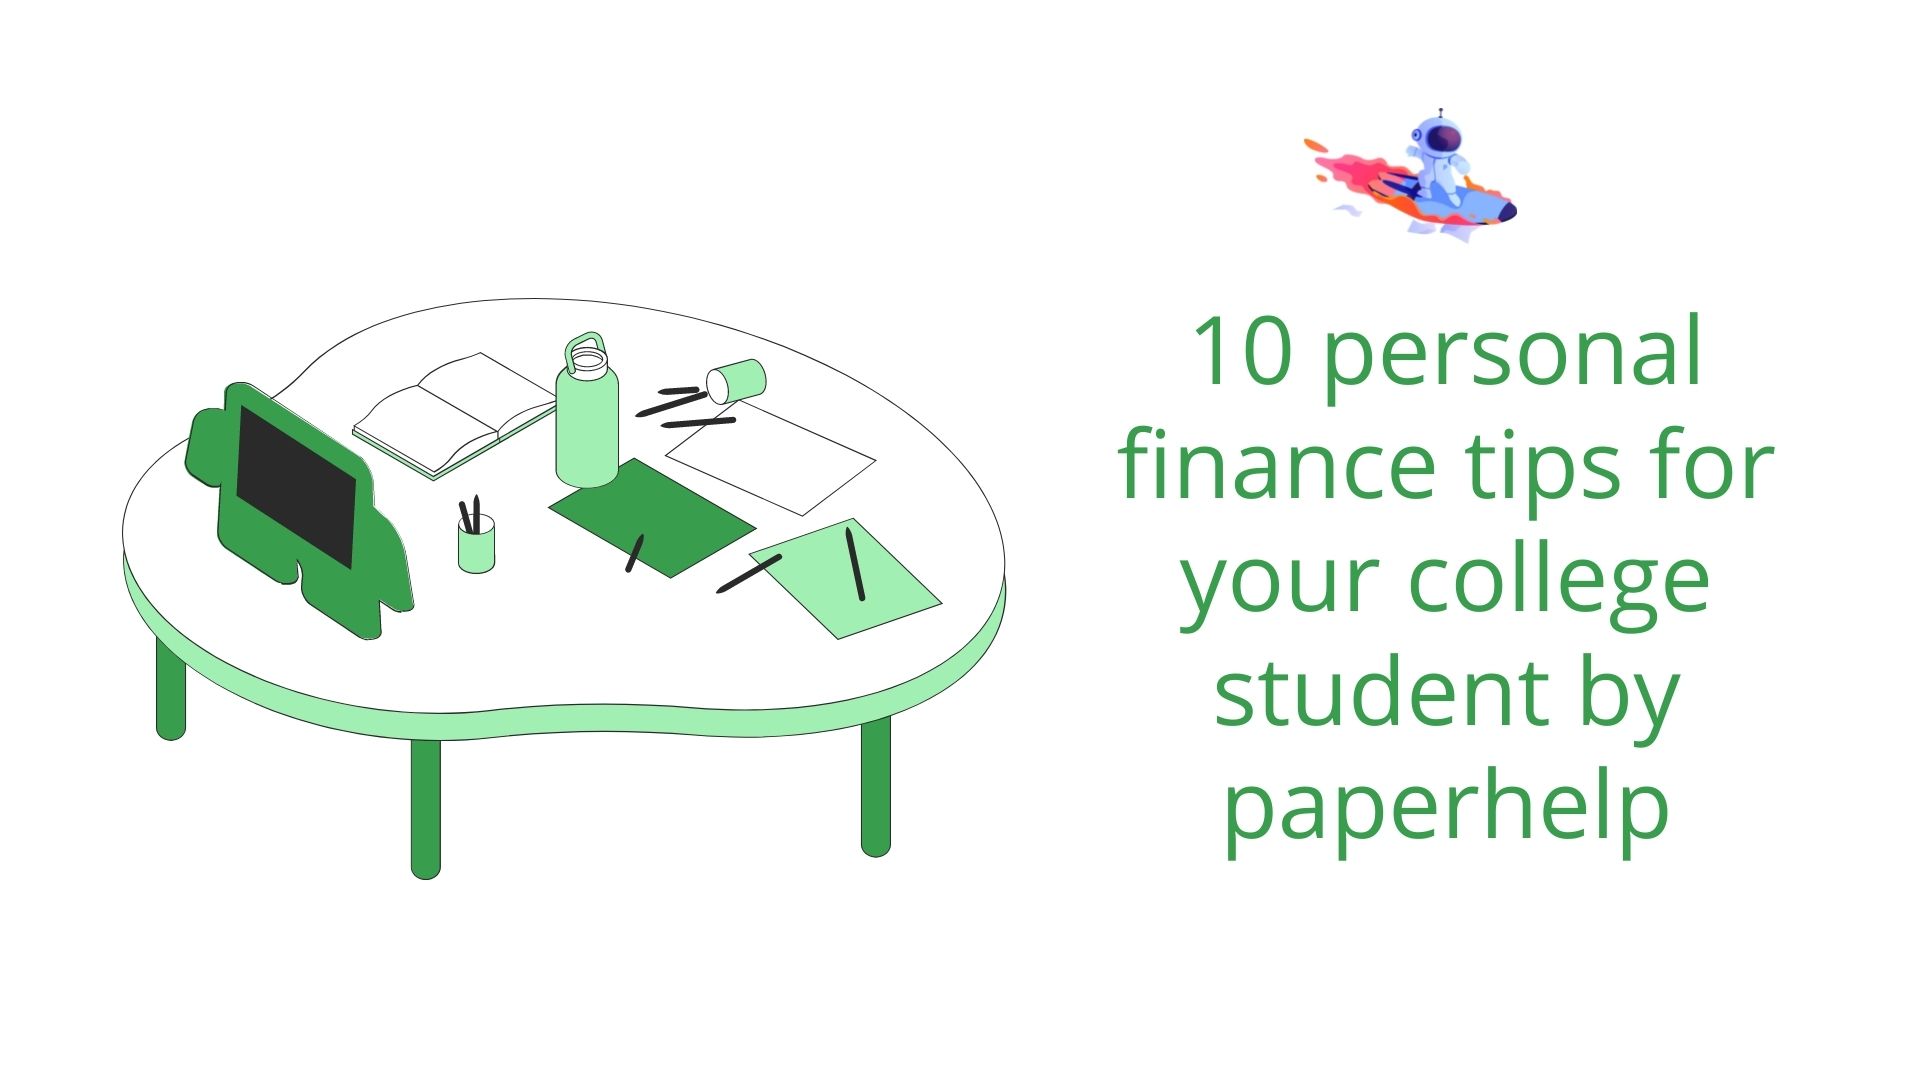 Article about 10 personal finance tips for your college student by paperhelp